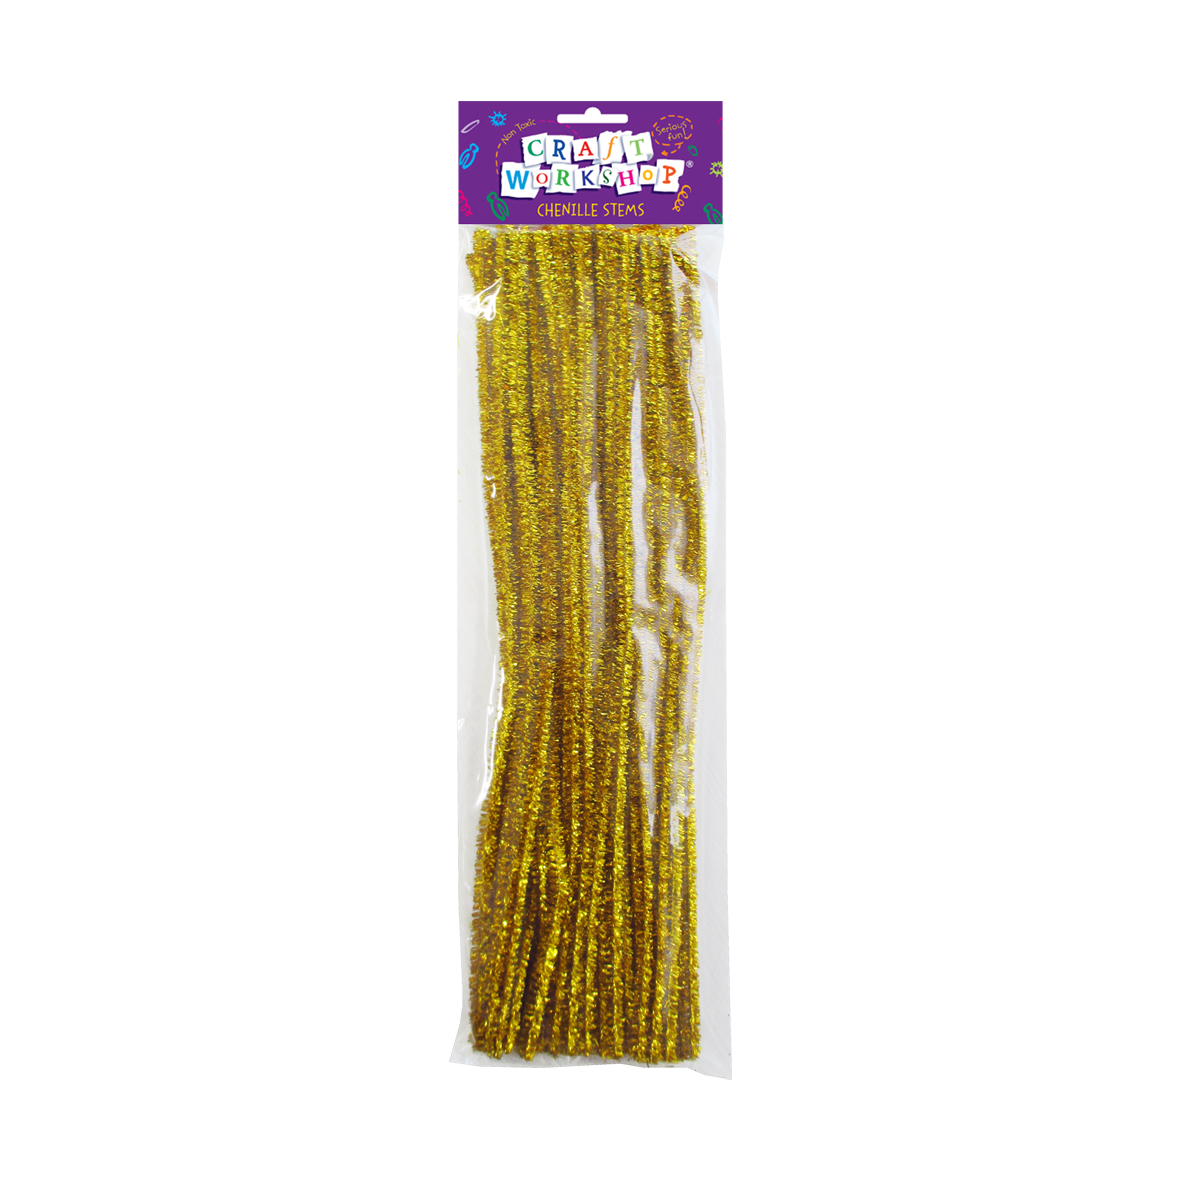 Chenille Sparkly Stems, 12-in (30-cm), 50-pc, Gold